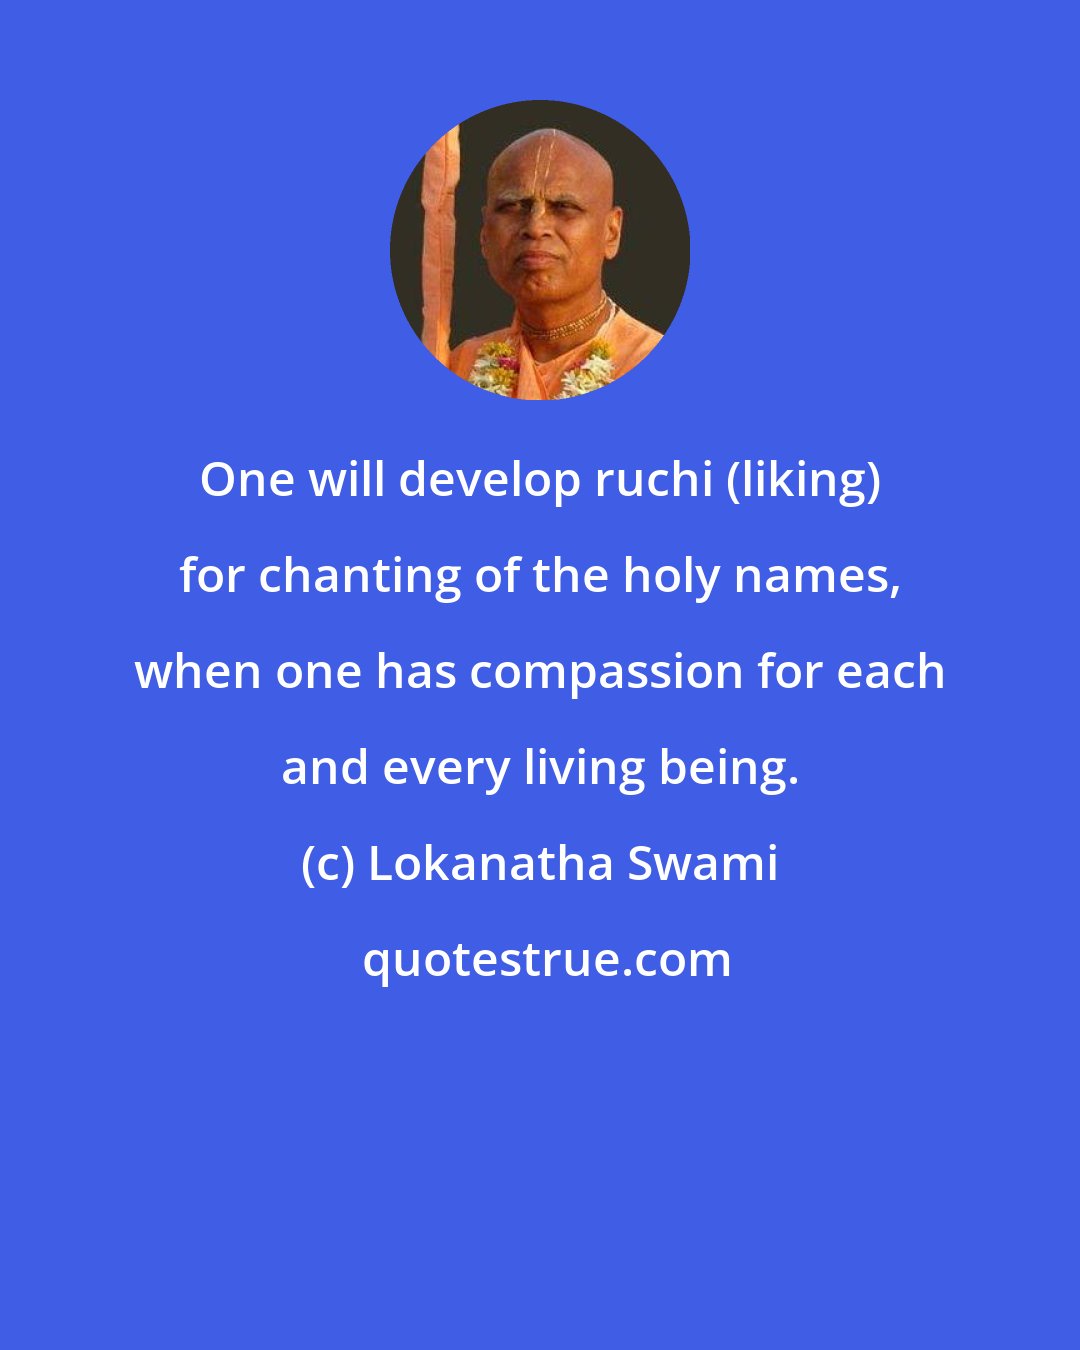 Lokanatha Swami: One will develop ruchi (liking) for chanting of the holy names, when one has compassion for each and every living being.